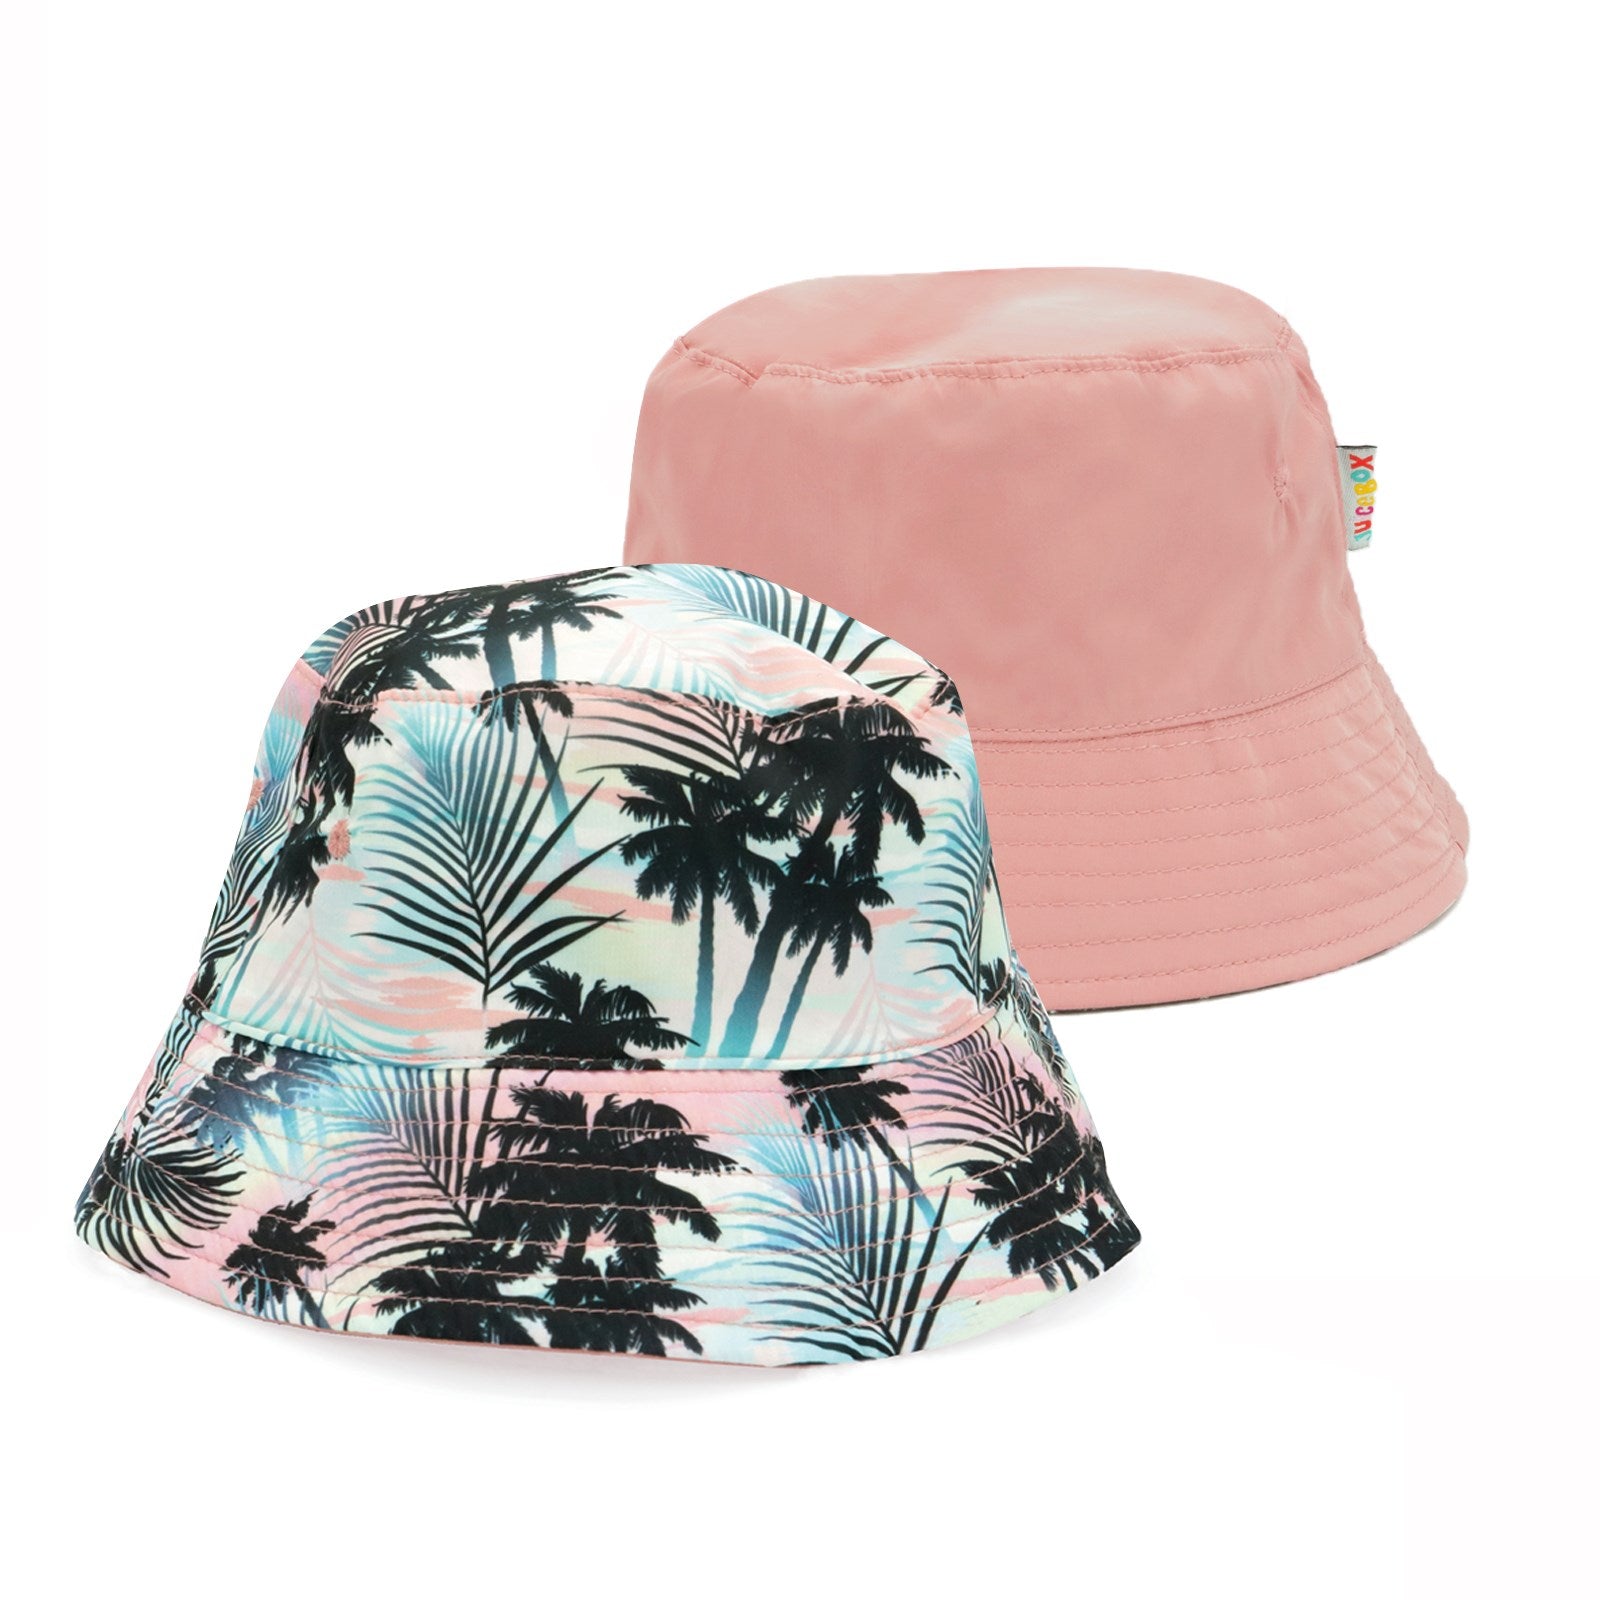 Reversible UV Protection Bucket Hat - Beauty and the Beach/ Pink